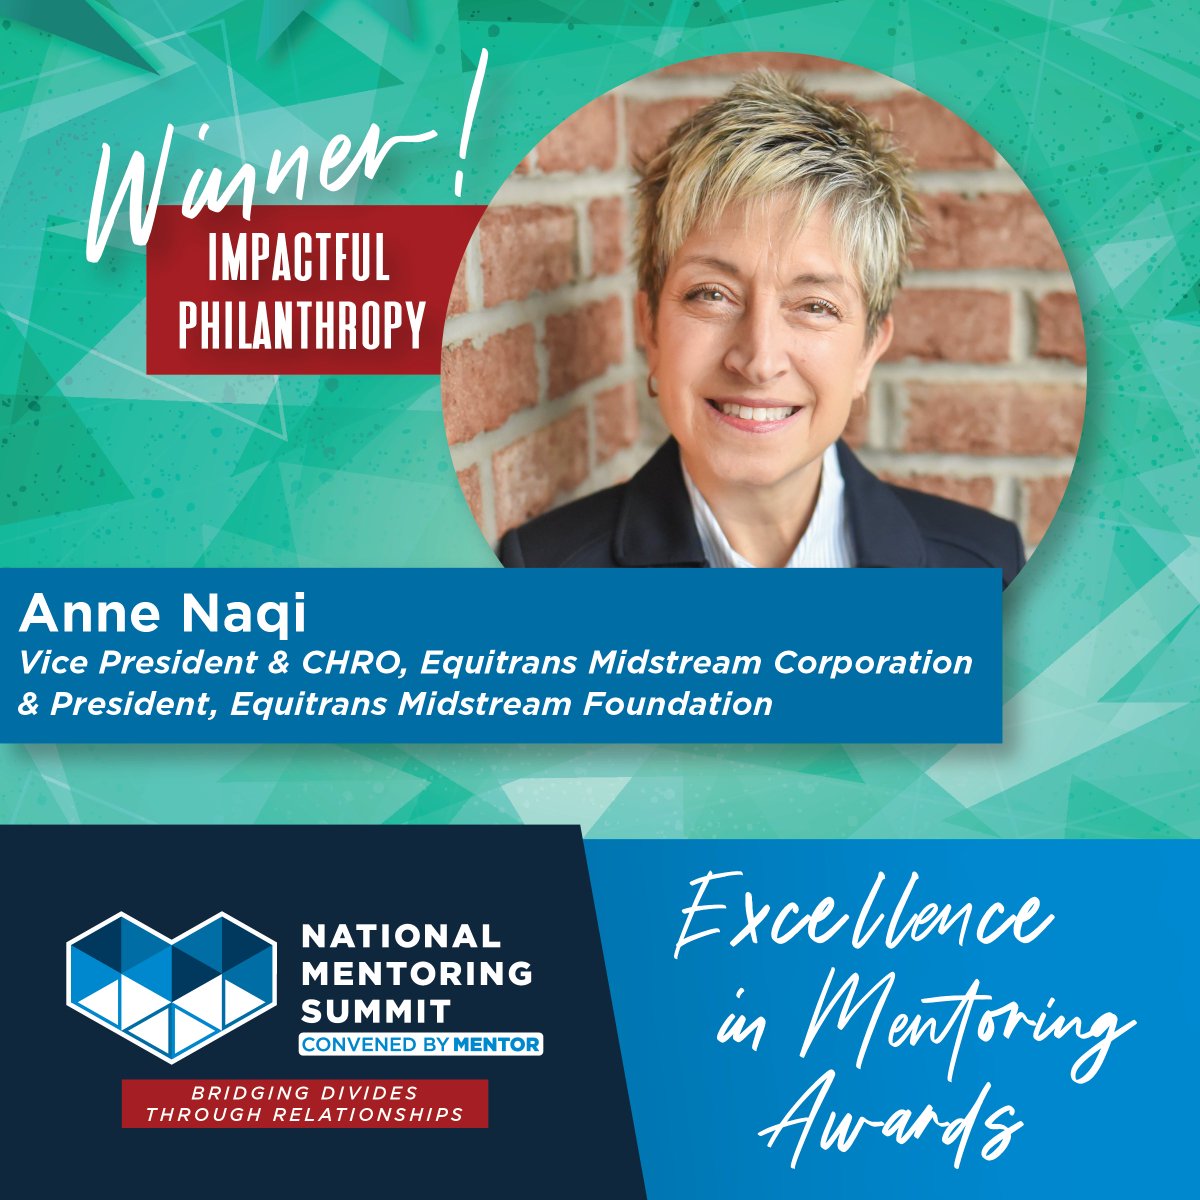 Congratulations to the winners of our 2023 Excellence in Mentoring Awards! We are continuously inspired by these honorees & are so grateful to have them in the mentoring movement. Read more about their work & impact at: bit.ly/2MupaIR #MentoringAmplifies #MentoringMonth